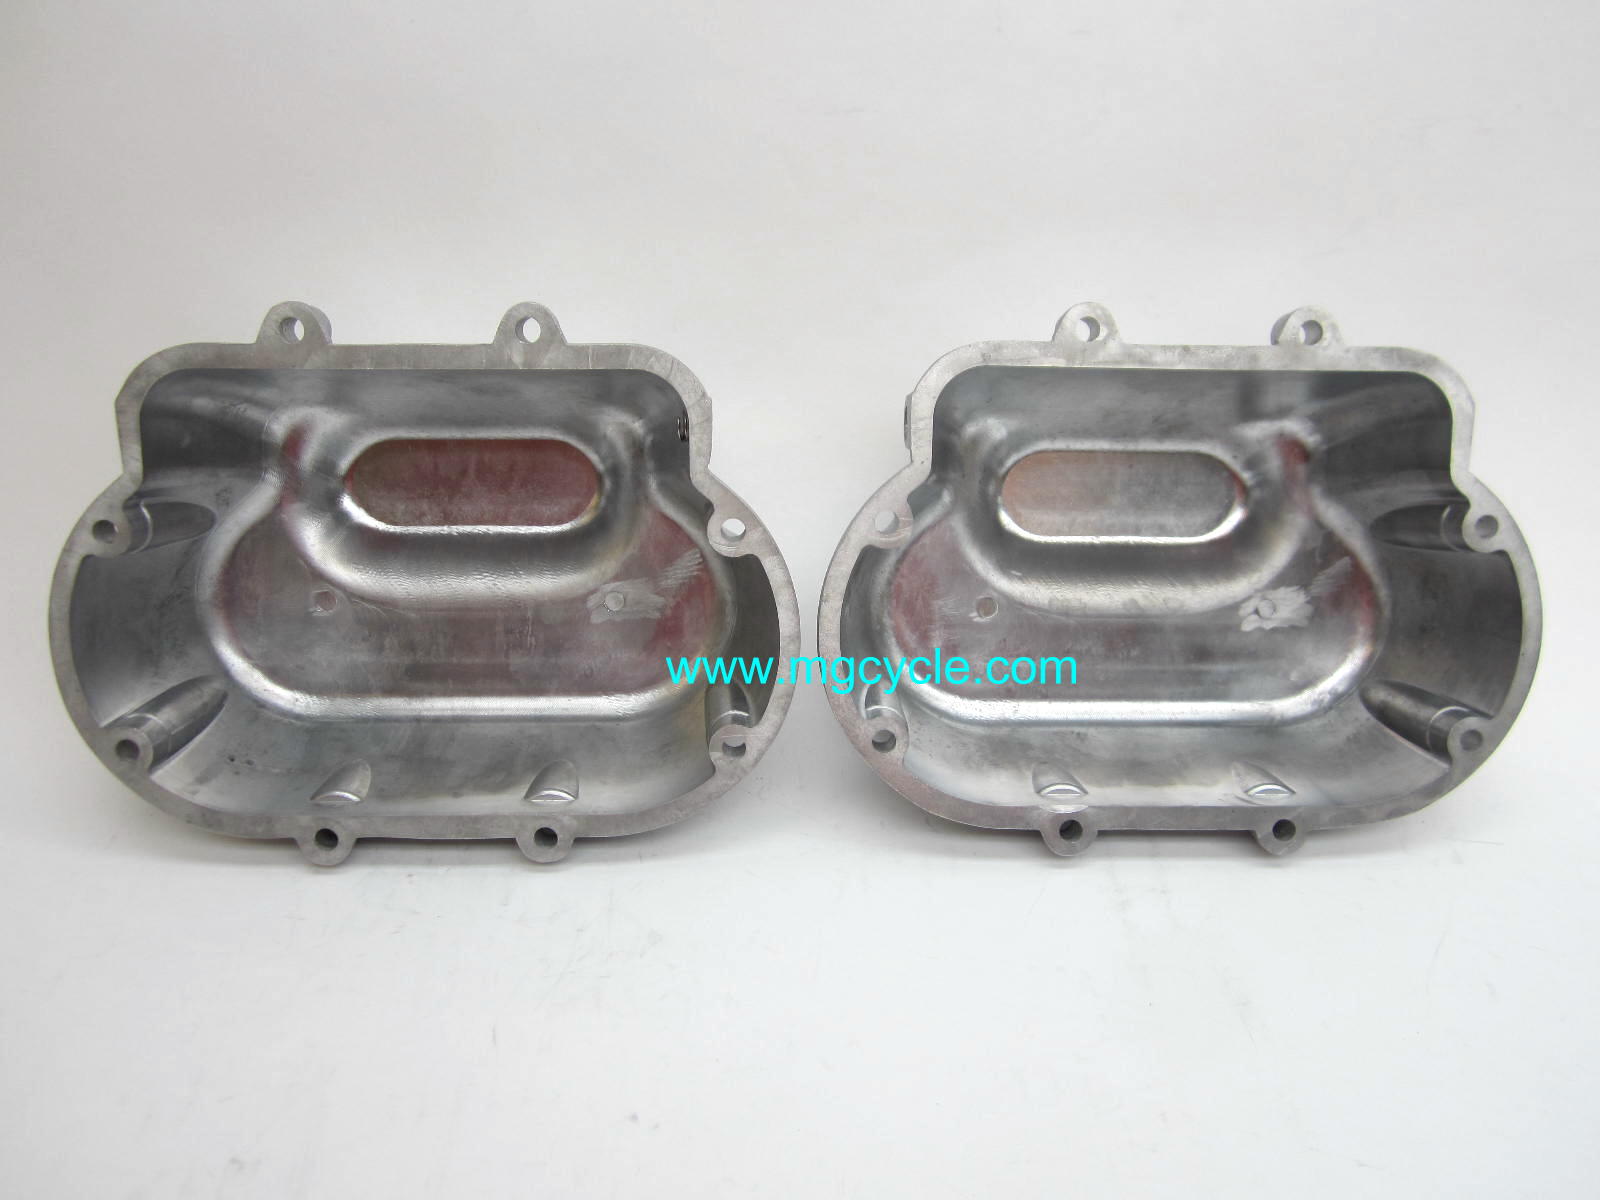 Valve cover set, V7 Sport, 750S, 850T, with vent holes